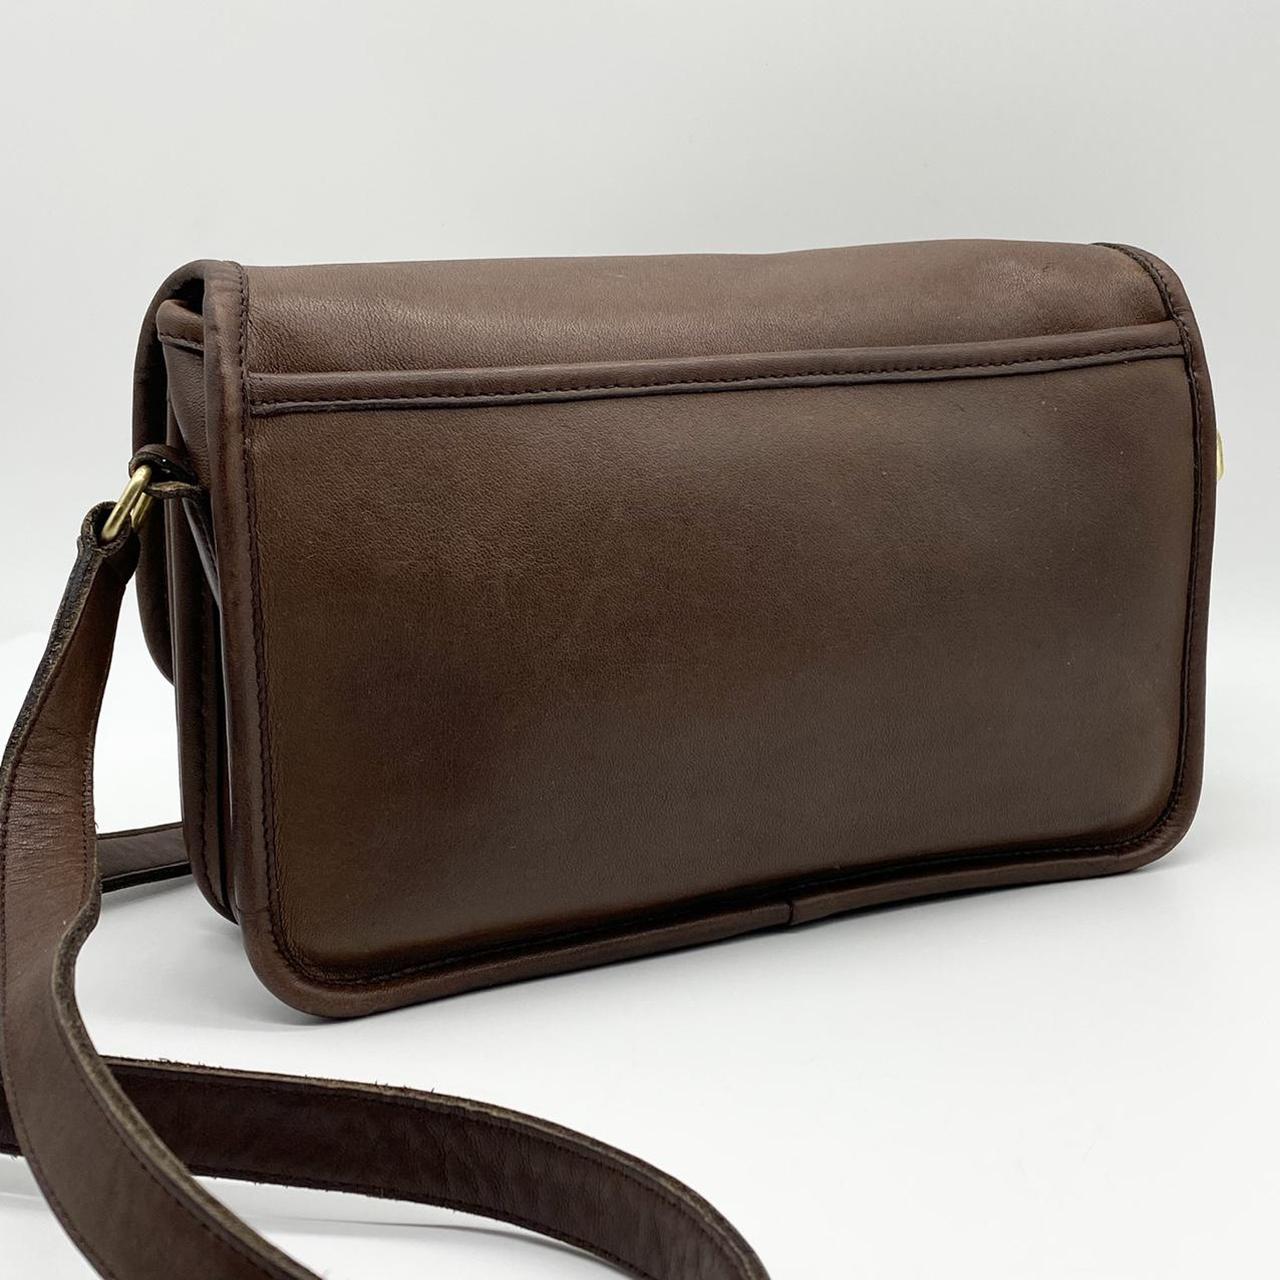 Product Image 2 - Beautiful vintage Coach compartment bag